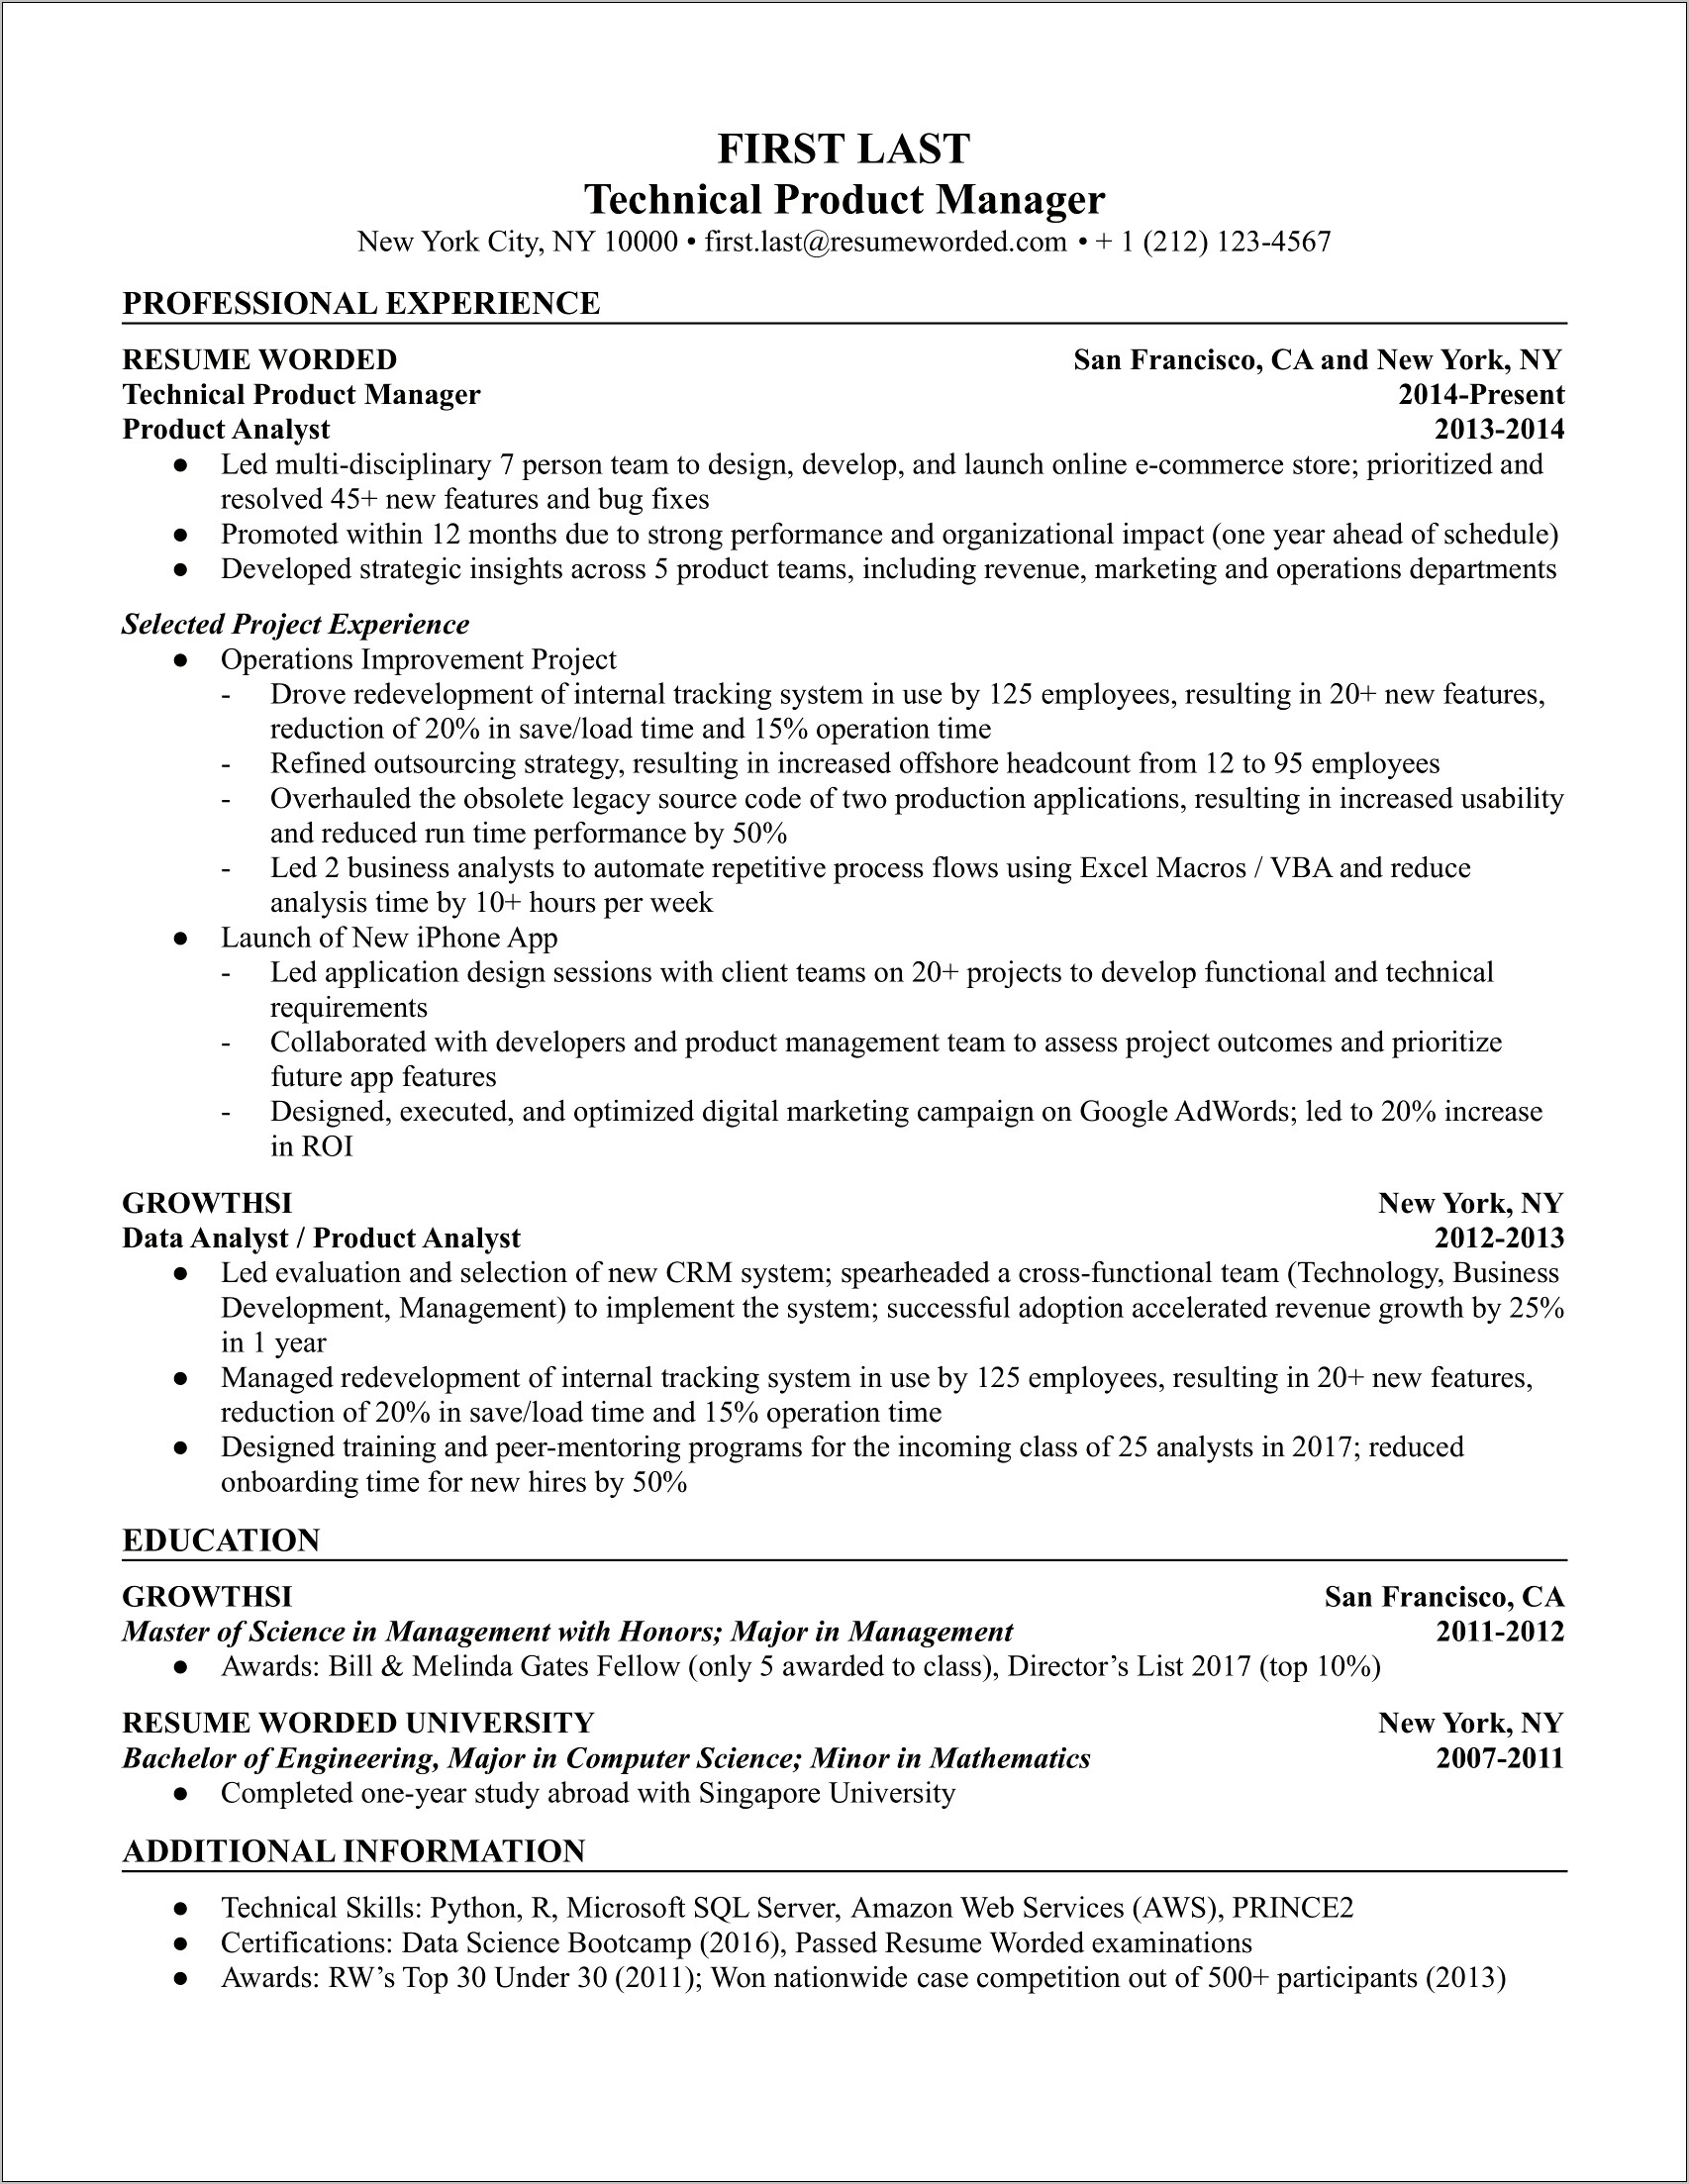 Technical Product Manager Resume Samples